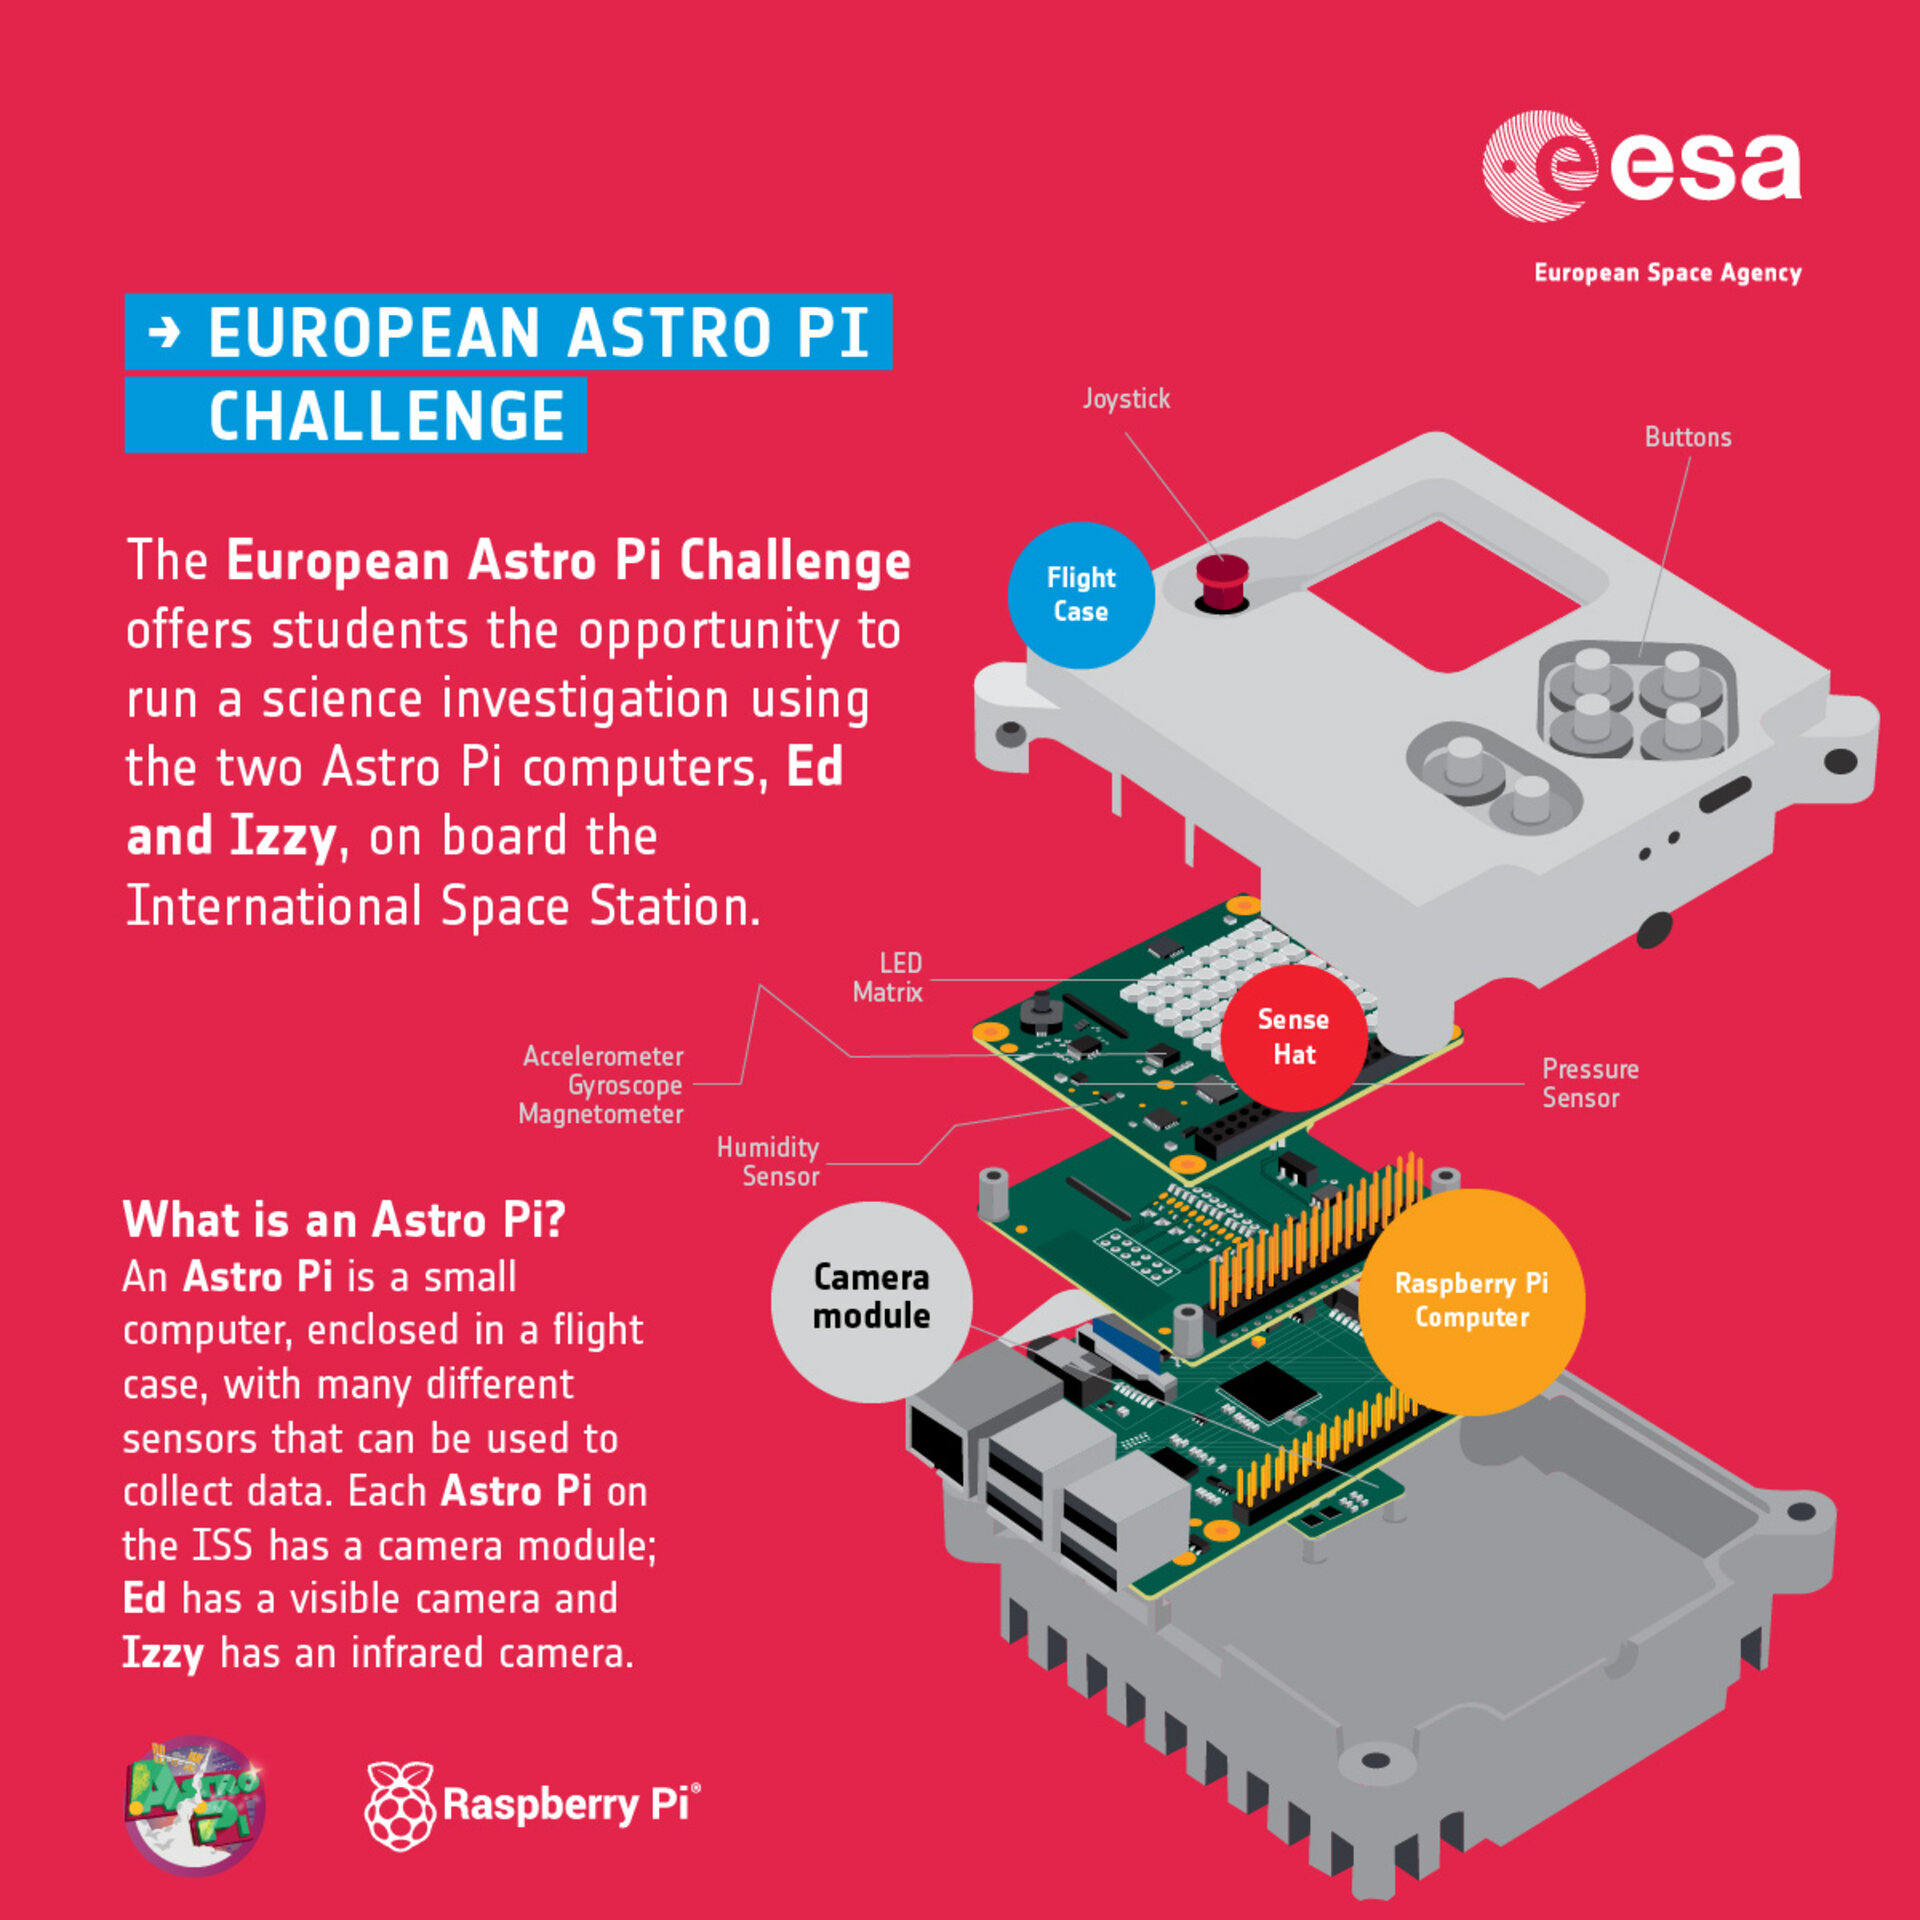 What is an Astro Pi?